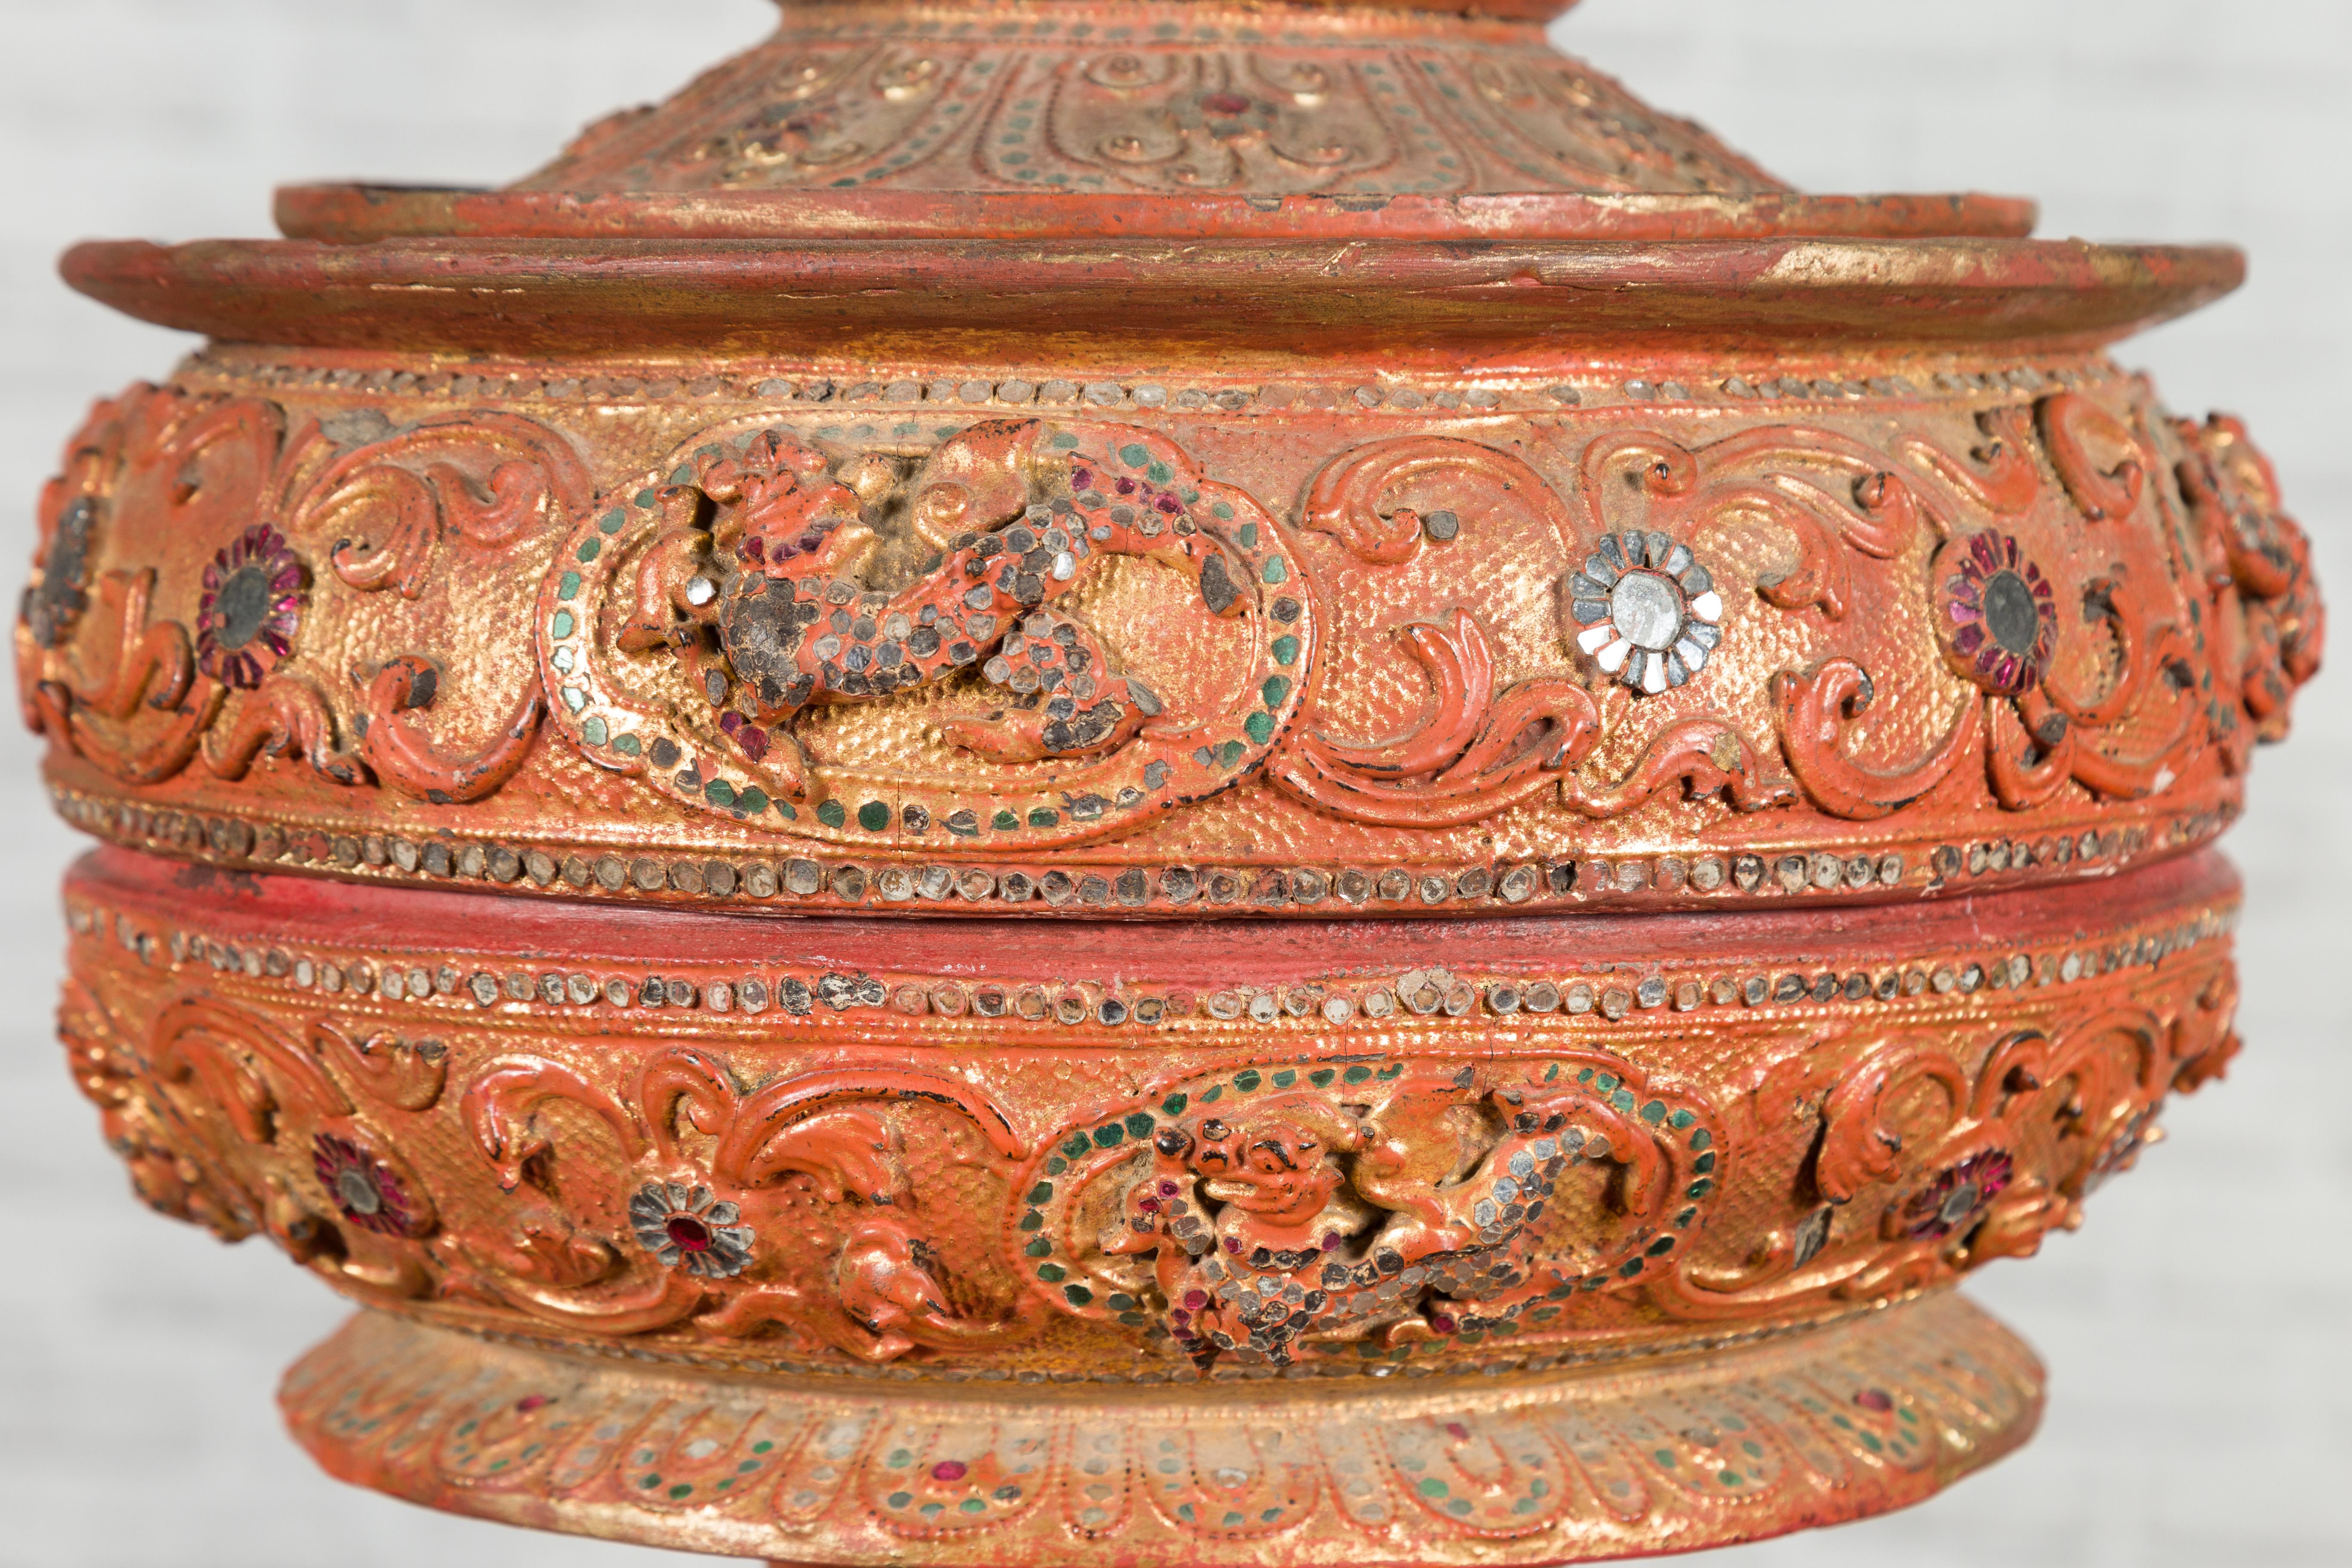 Antique Burmese Carved Teak Lidded Offering Bowl with Inlaid and Gilt Decor 11